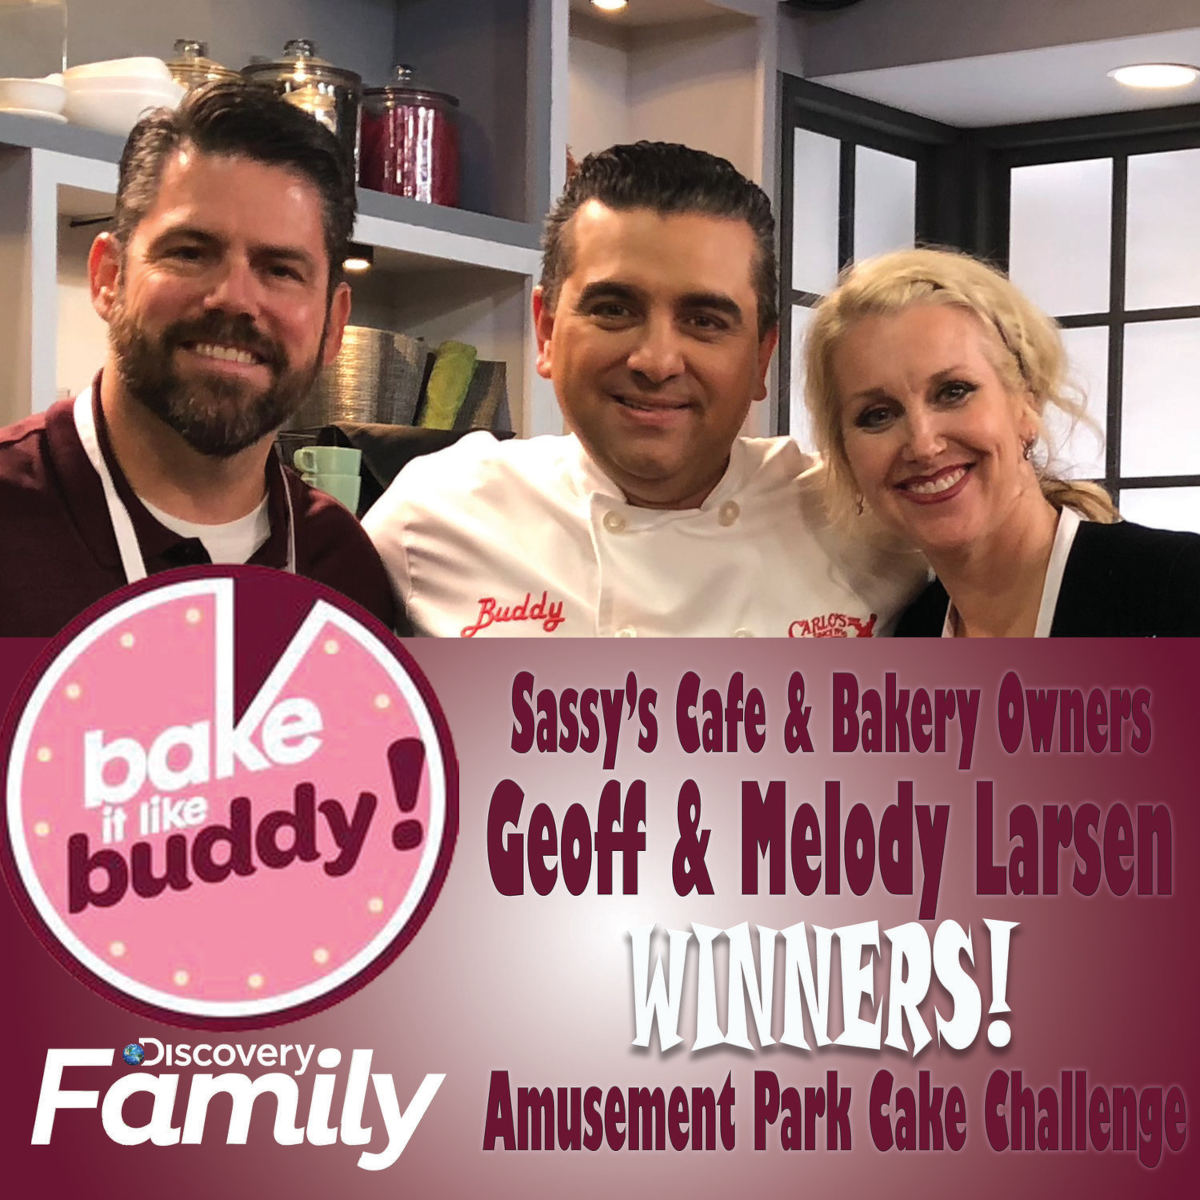 The Cake Boss Buddy with the owners